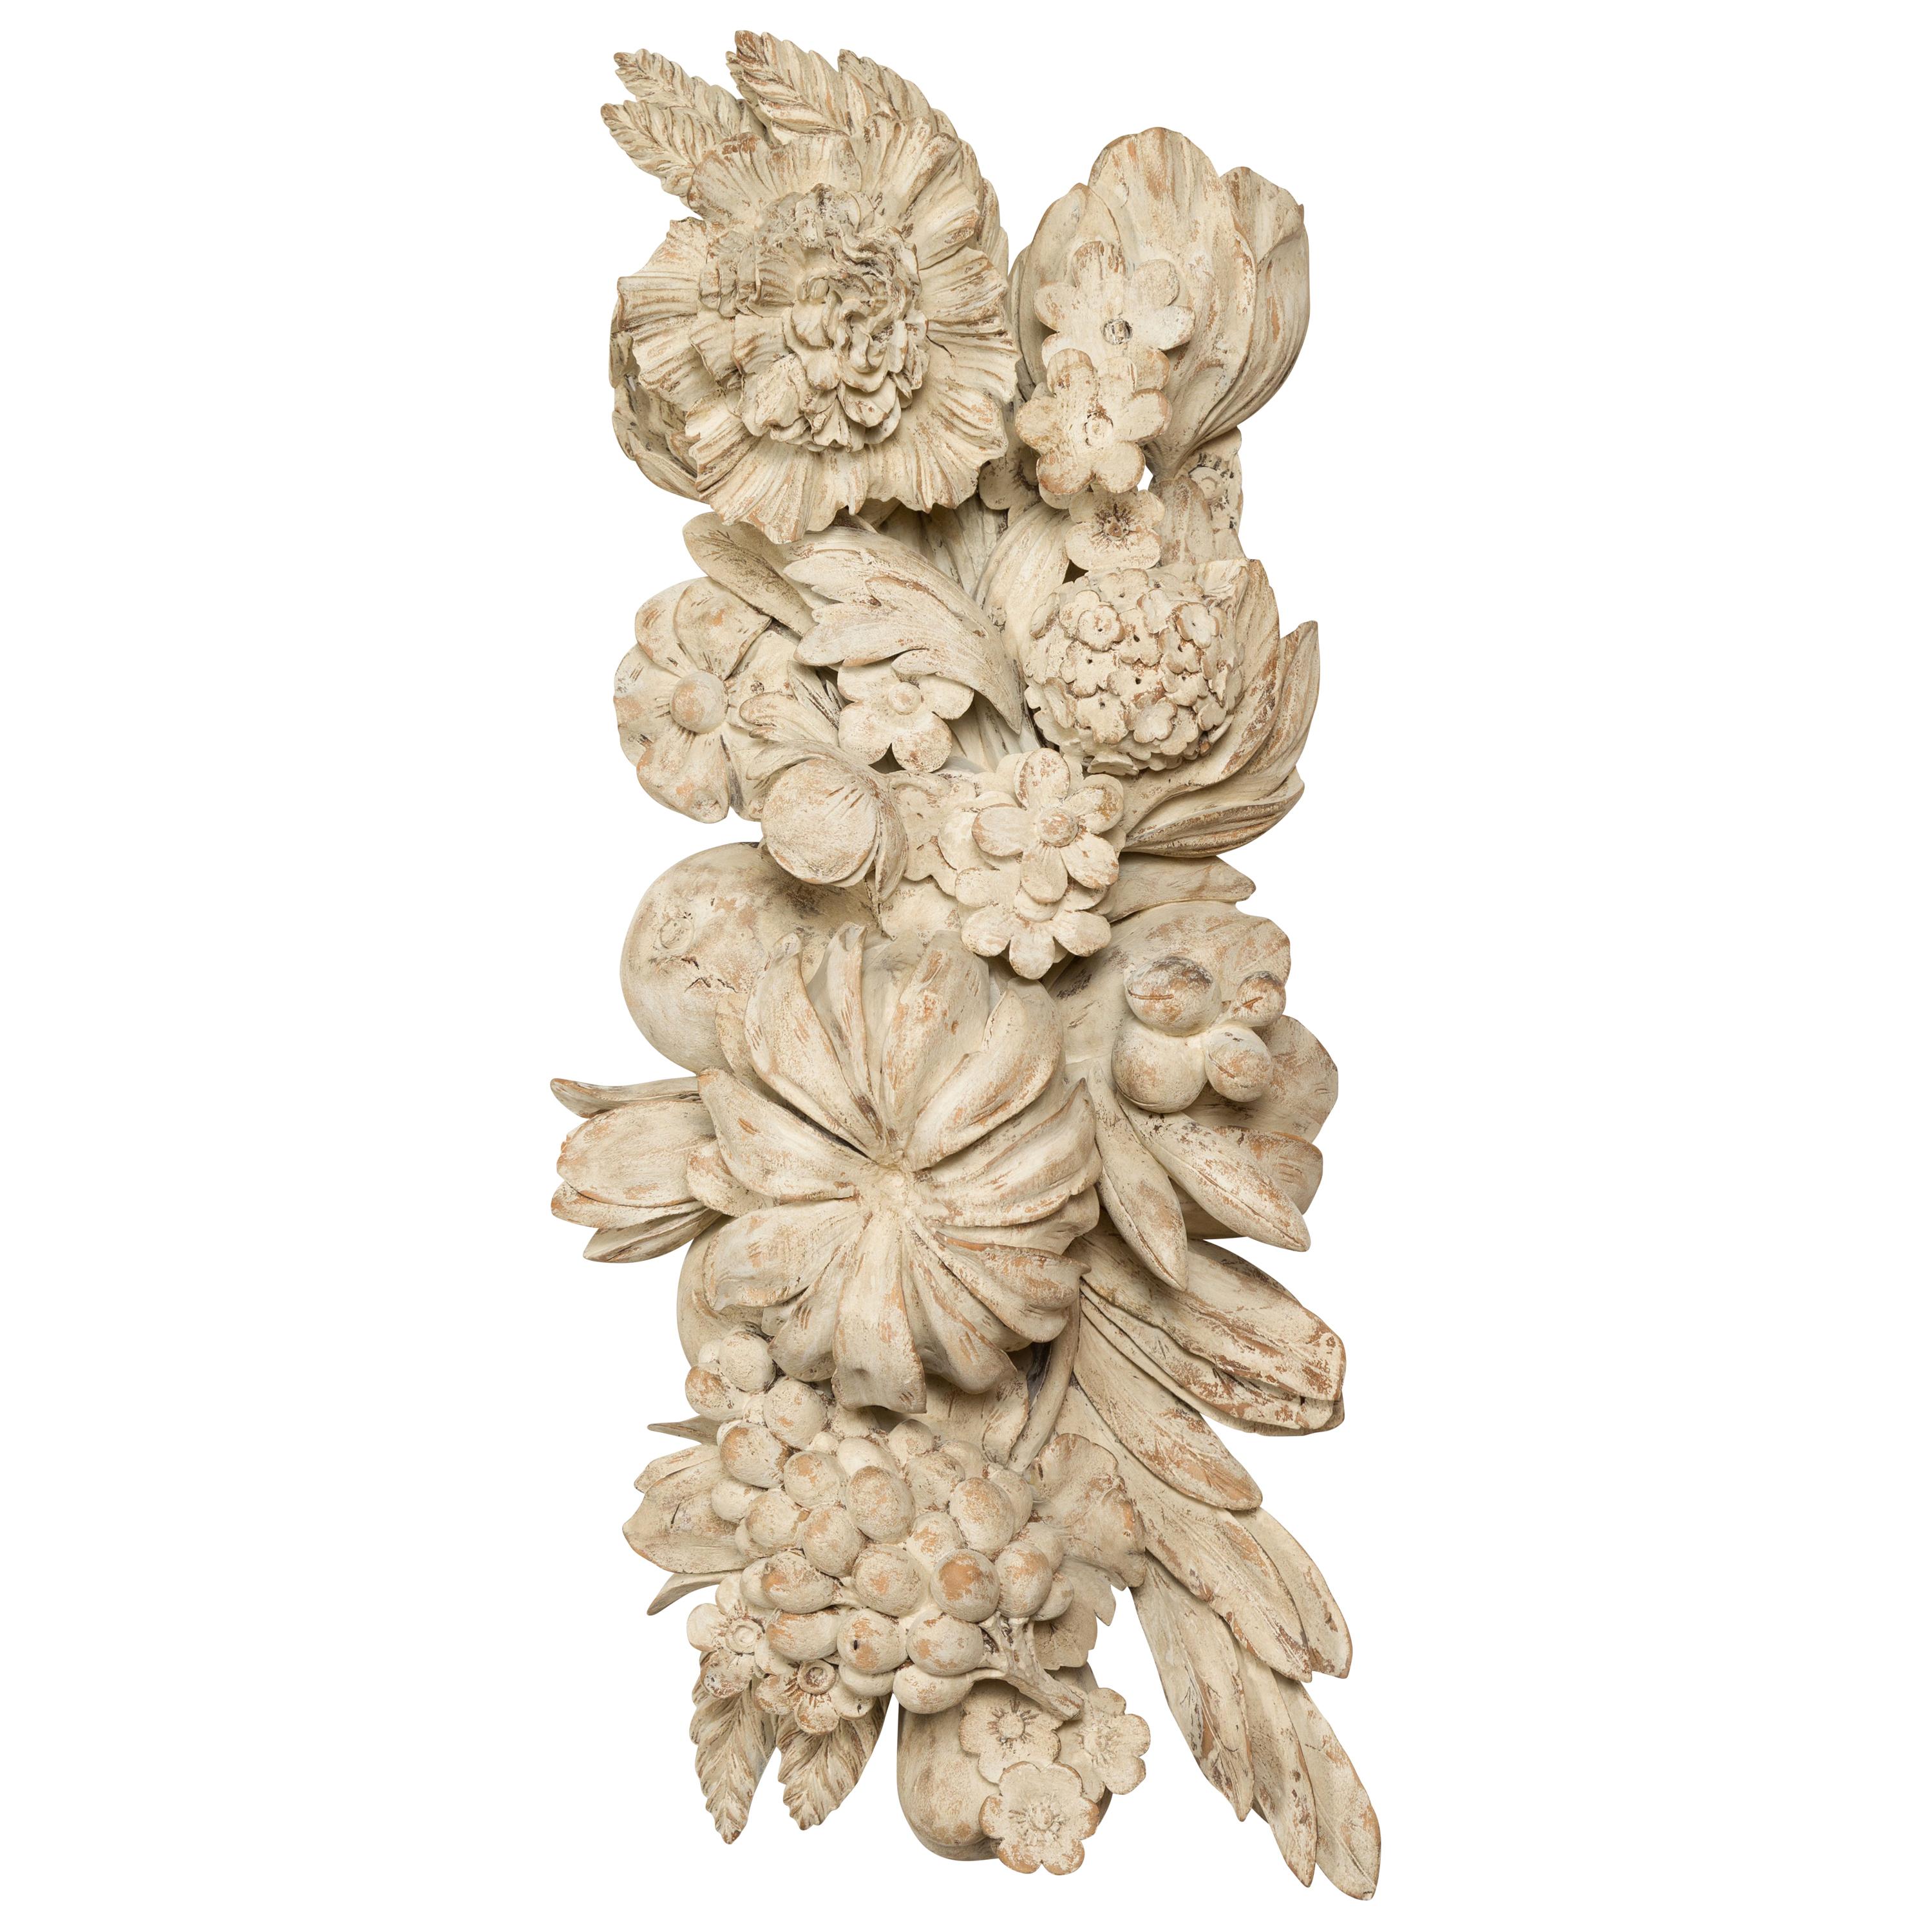 Italian 19th Century Carved and Painted Wooden Fragment with Fruits and Flowers